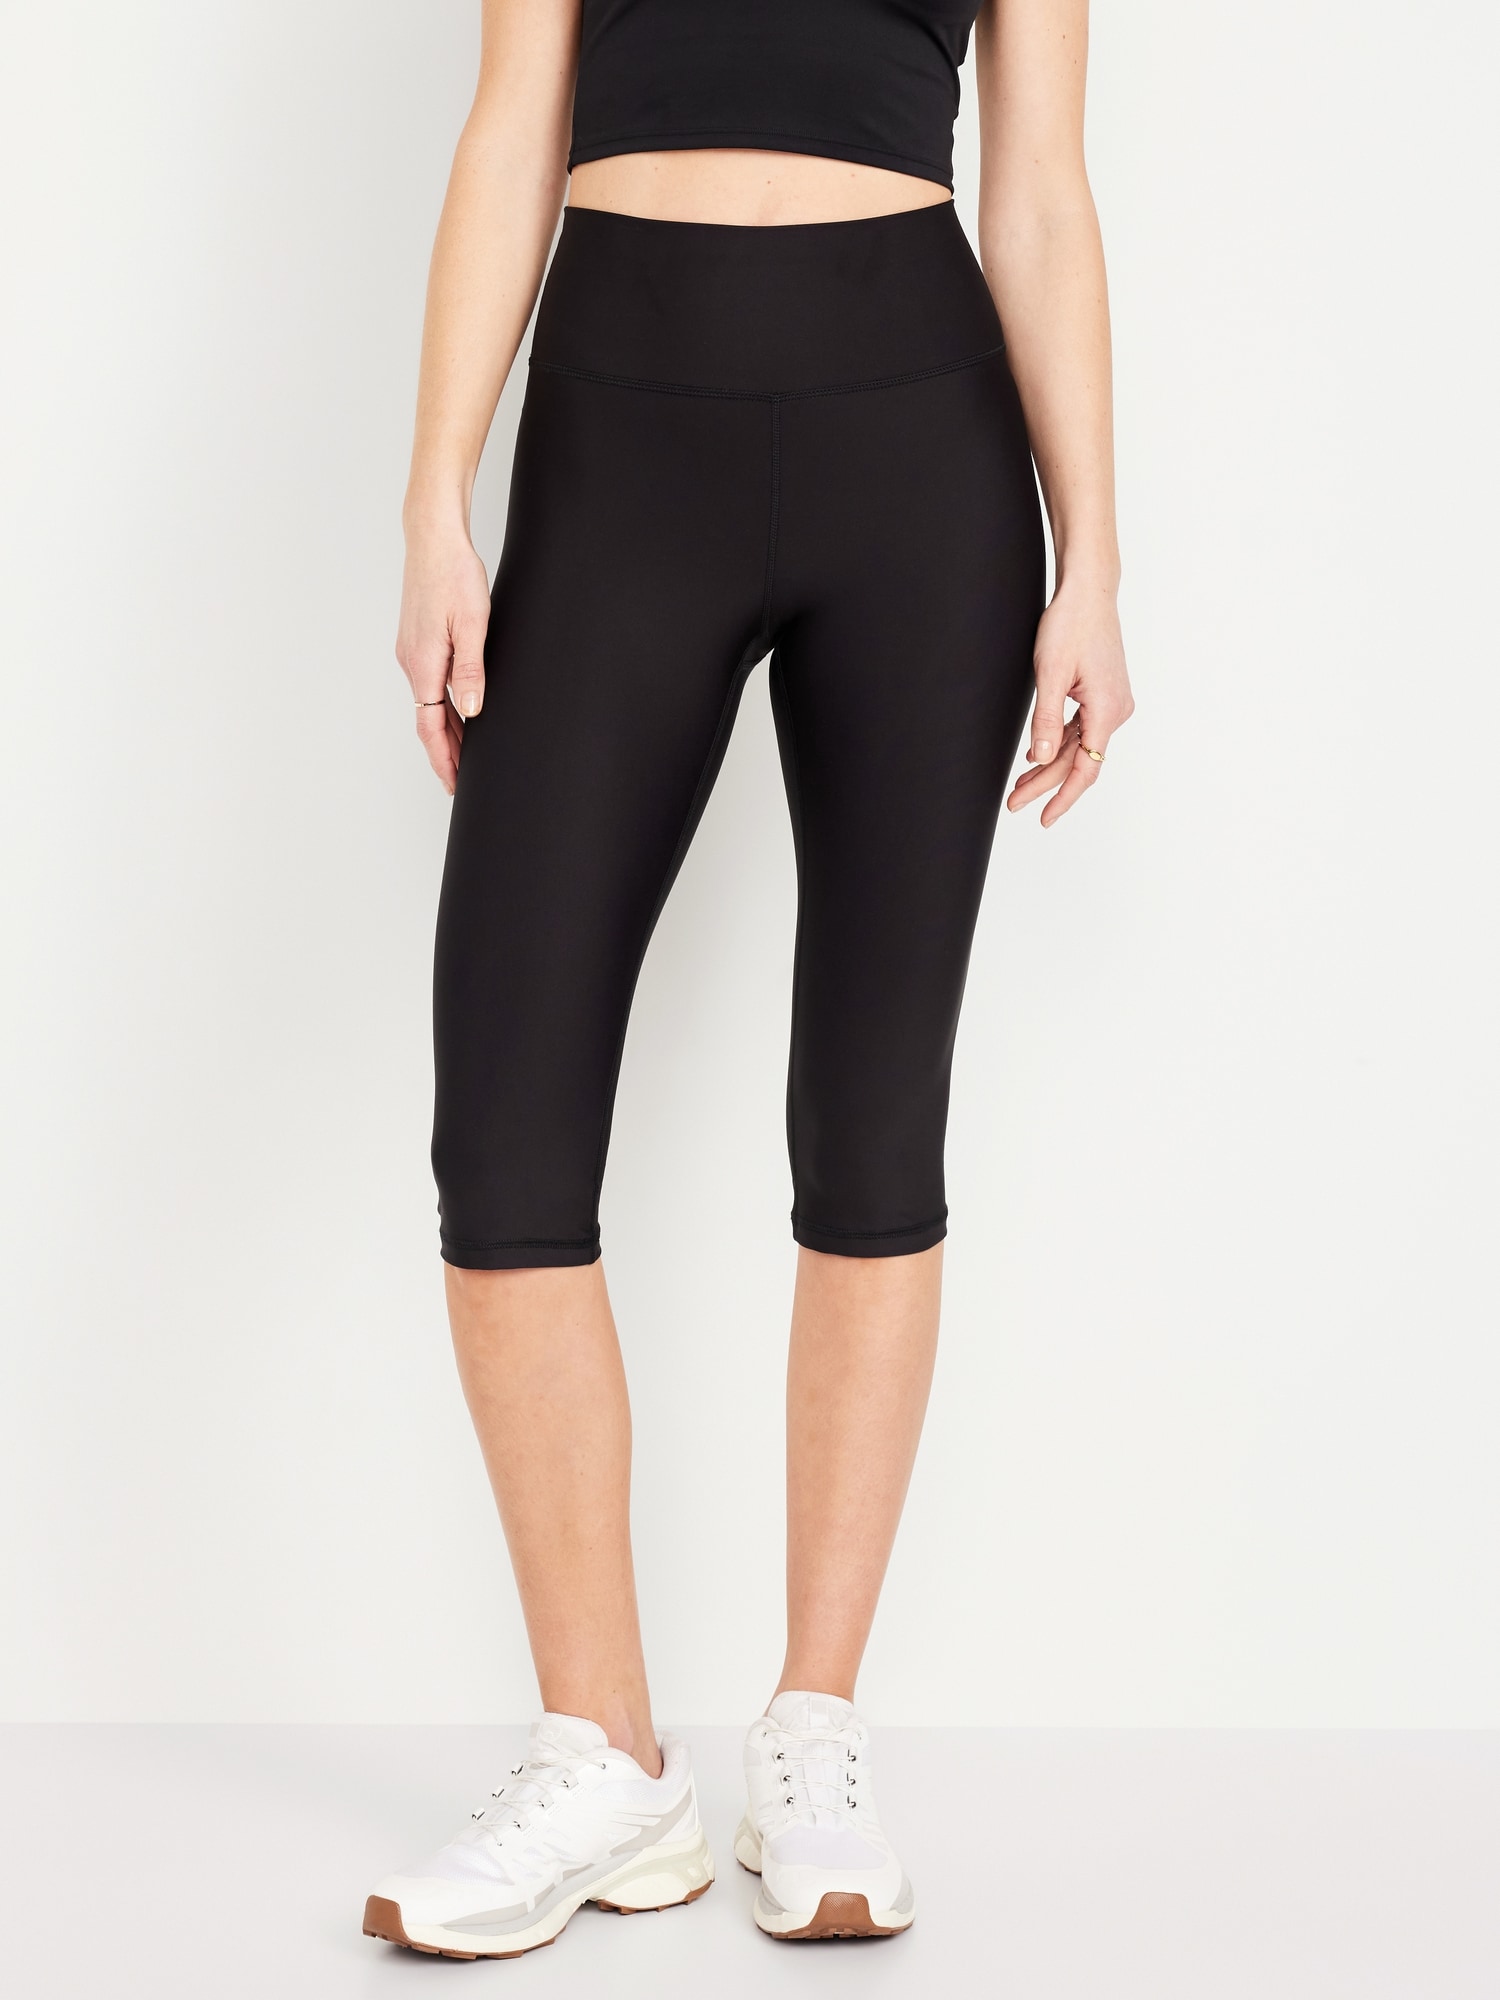 Old Navy High-Waisted PowerSoft Crop Leggings for Women - 16-inch inseam